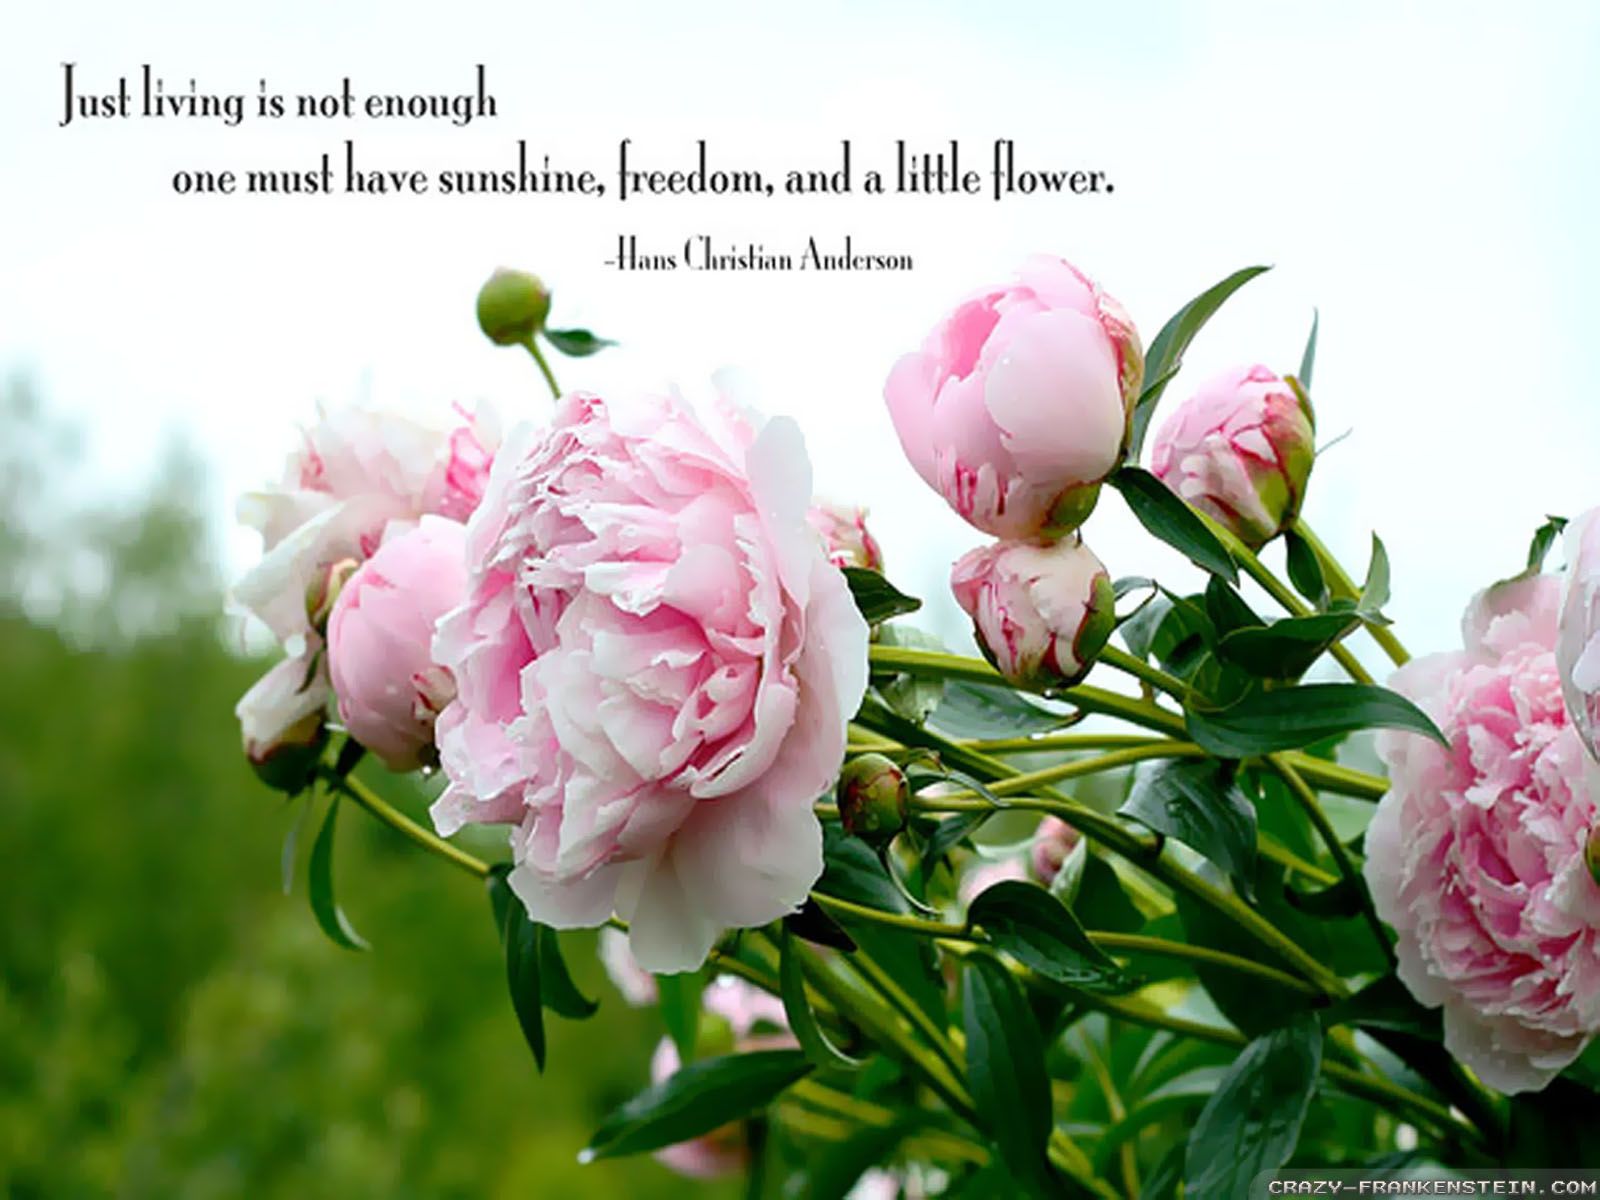 Flower Easter Quotes Wallpaper. Flower quotes, Good morning flowers, Morning flowers